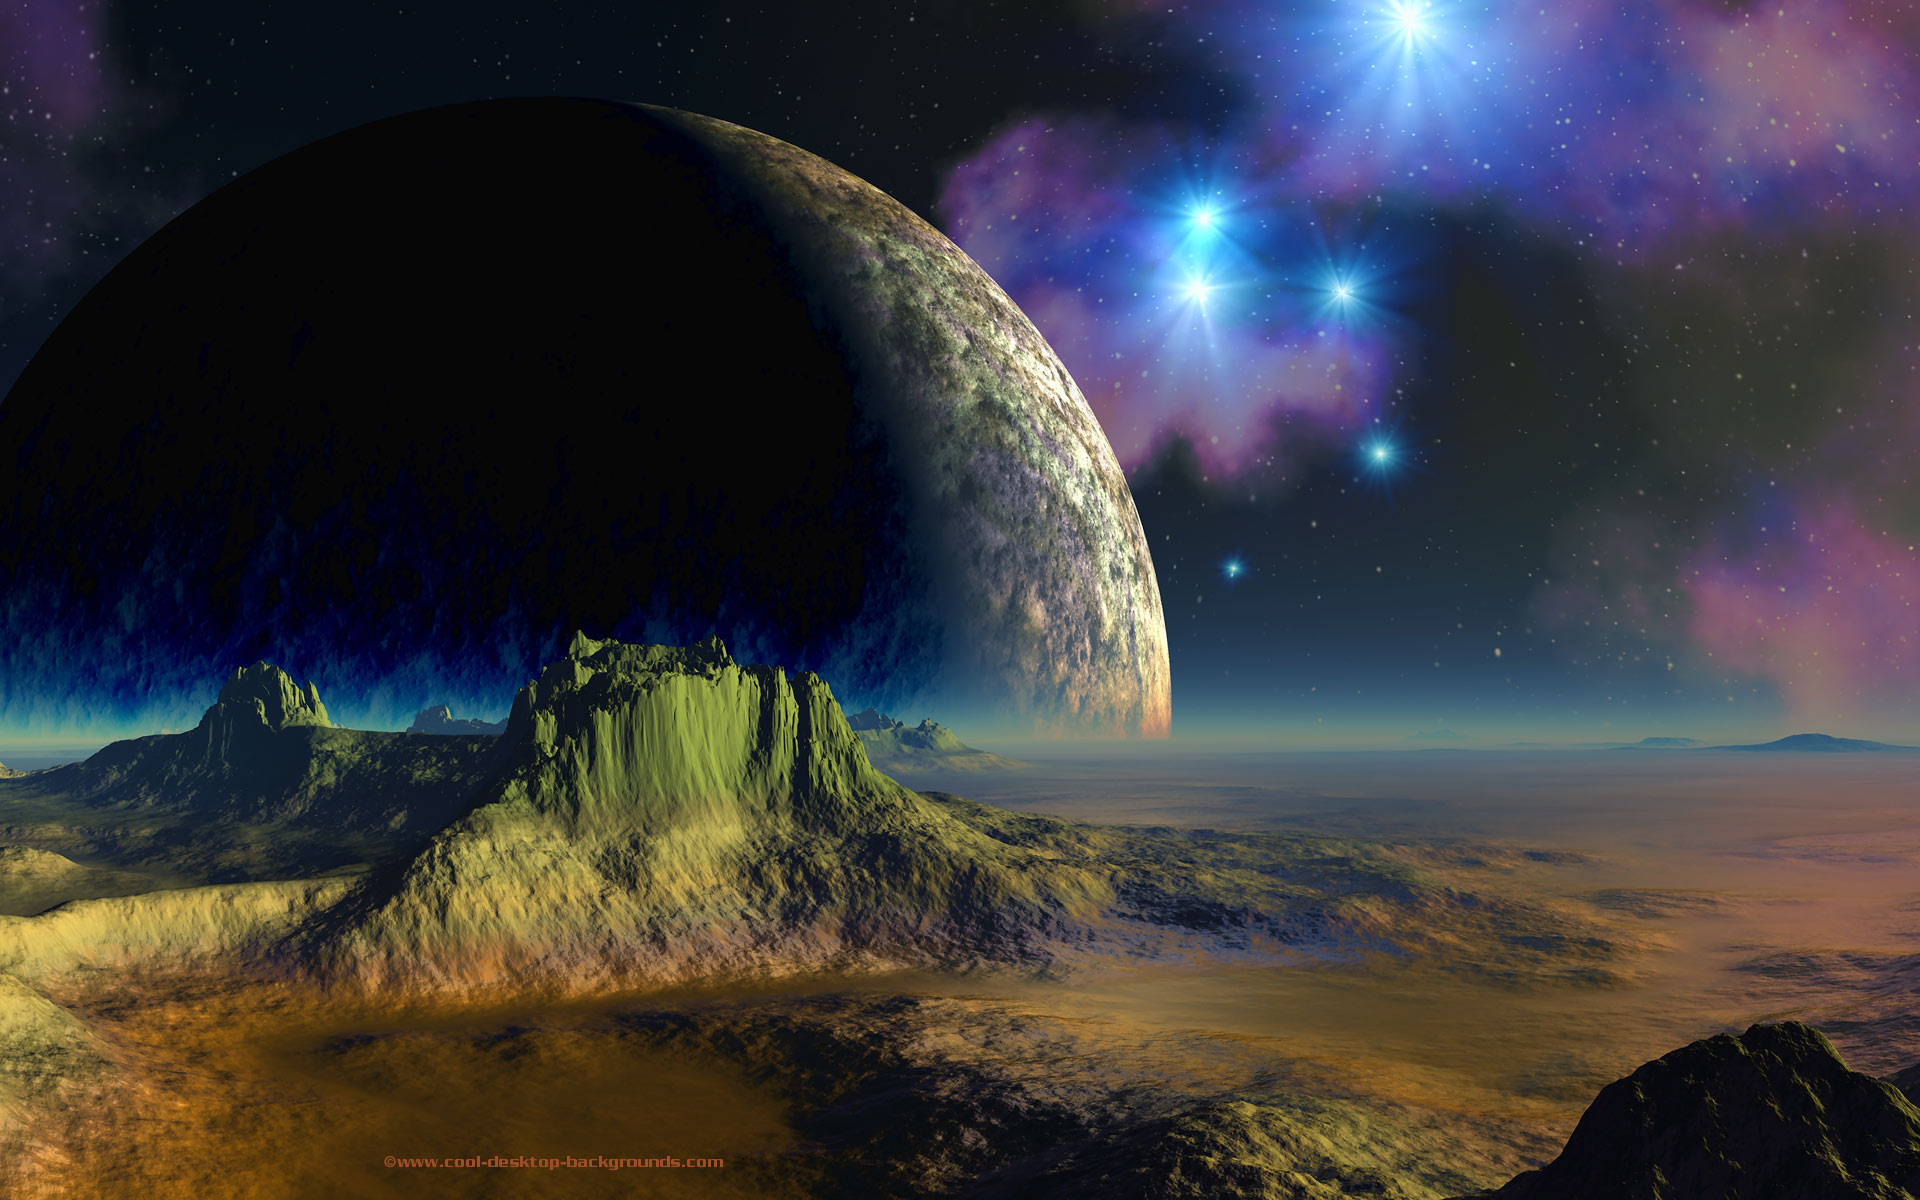 Cool high resolution sci fi background of a moon setting on an alien